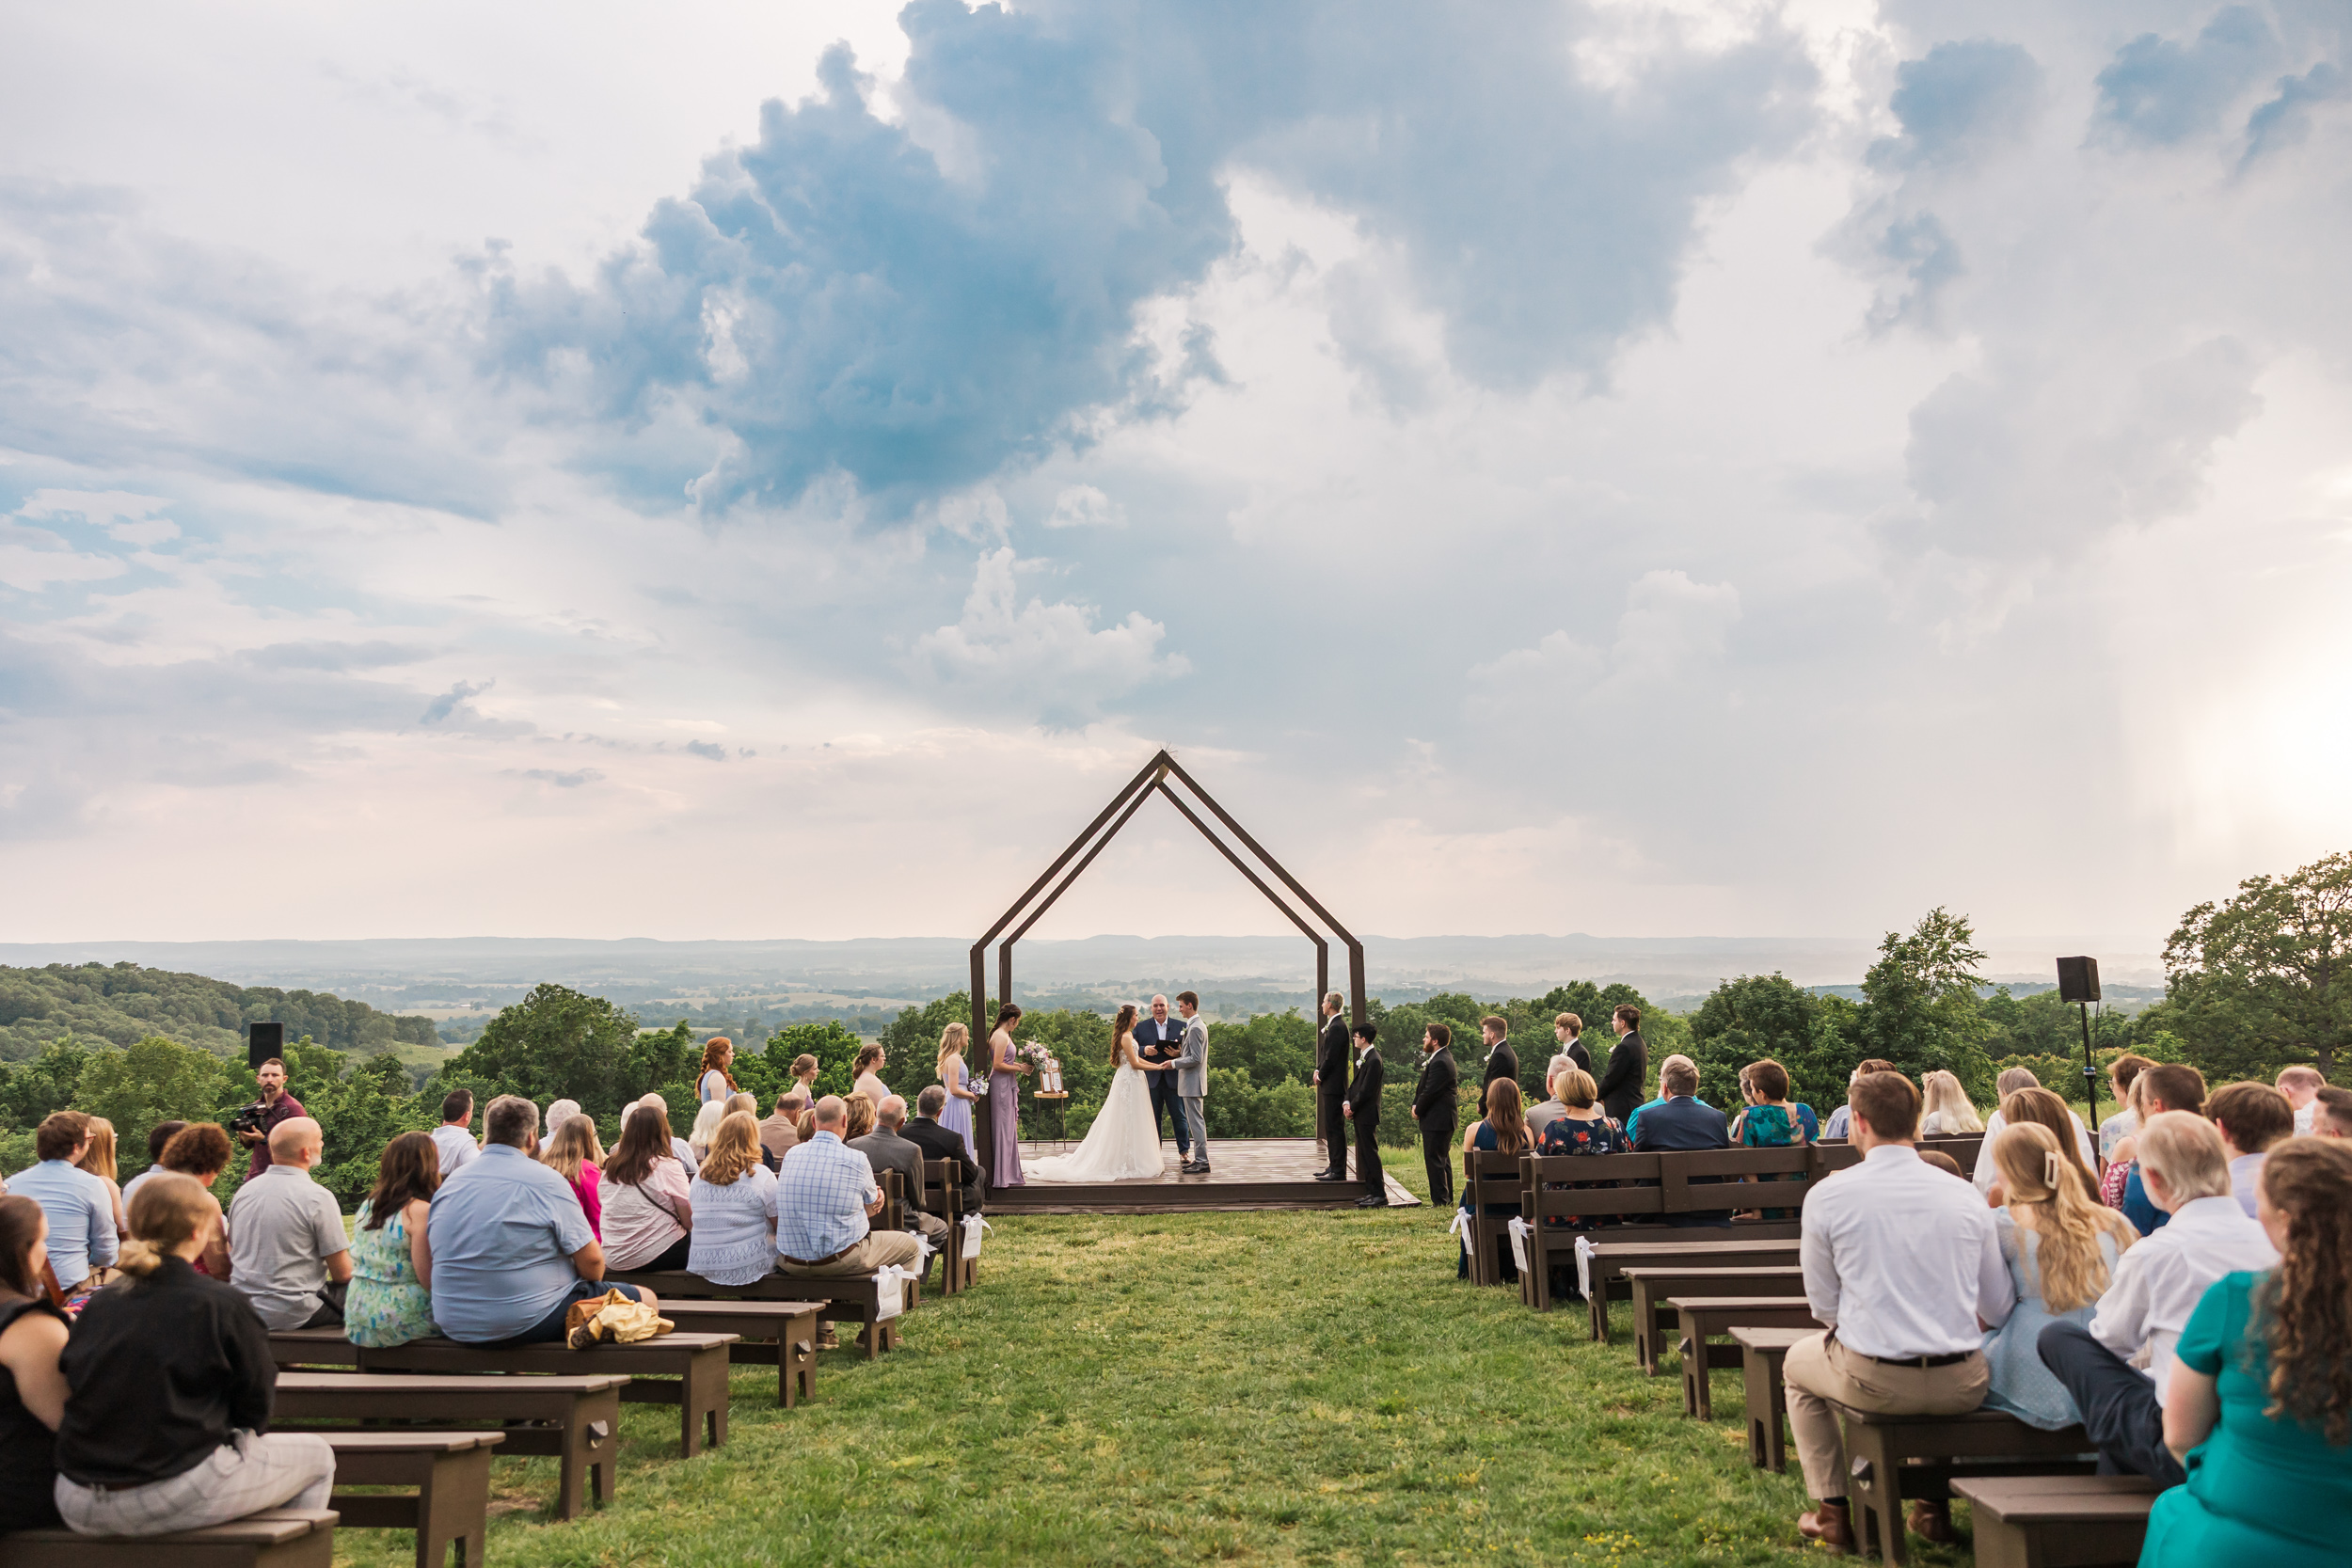 Summer wedding at Olive View Events in Omaha Arkansas. Photographed by Springfield MO wedding photographer Turner Creative.